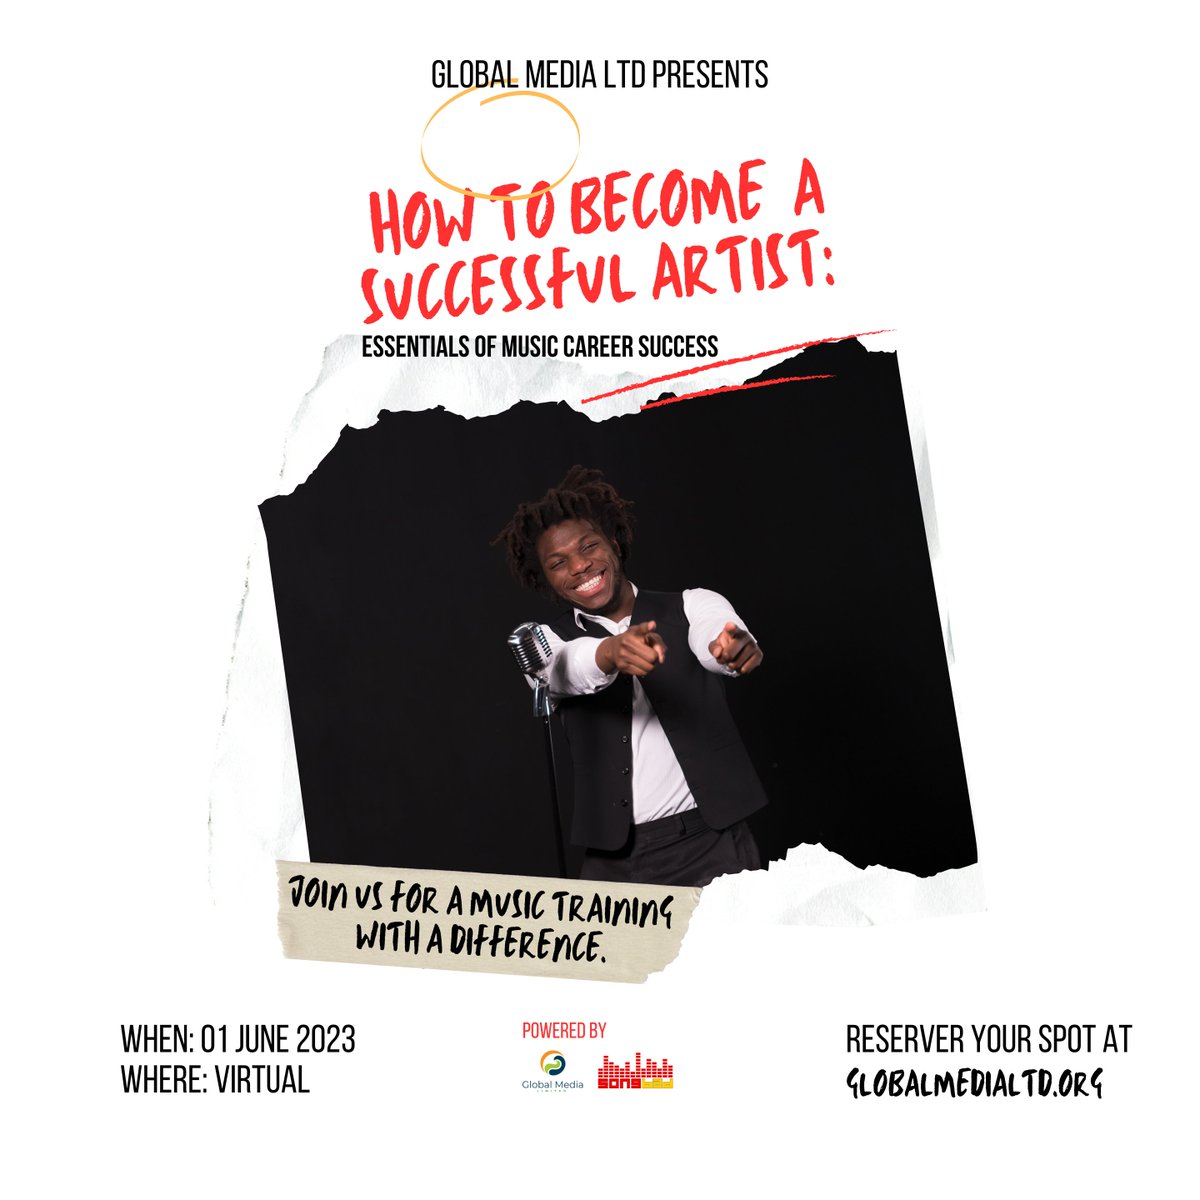 This June 1, 2023, from 7PM, join our comprehensive training program, 'How to Become a Successful Artist: Essentials of Music Career Success,' and unlock the keys to a thriving music career. Register: globalmedialtd.org/events

#Songbad #AskGlobalMedia #MusicTraining #fearwomen